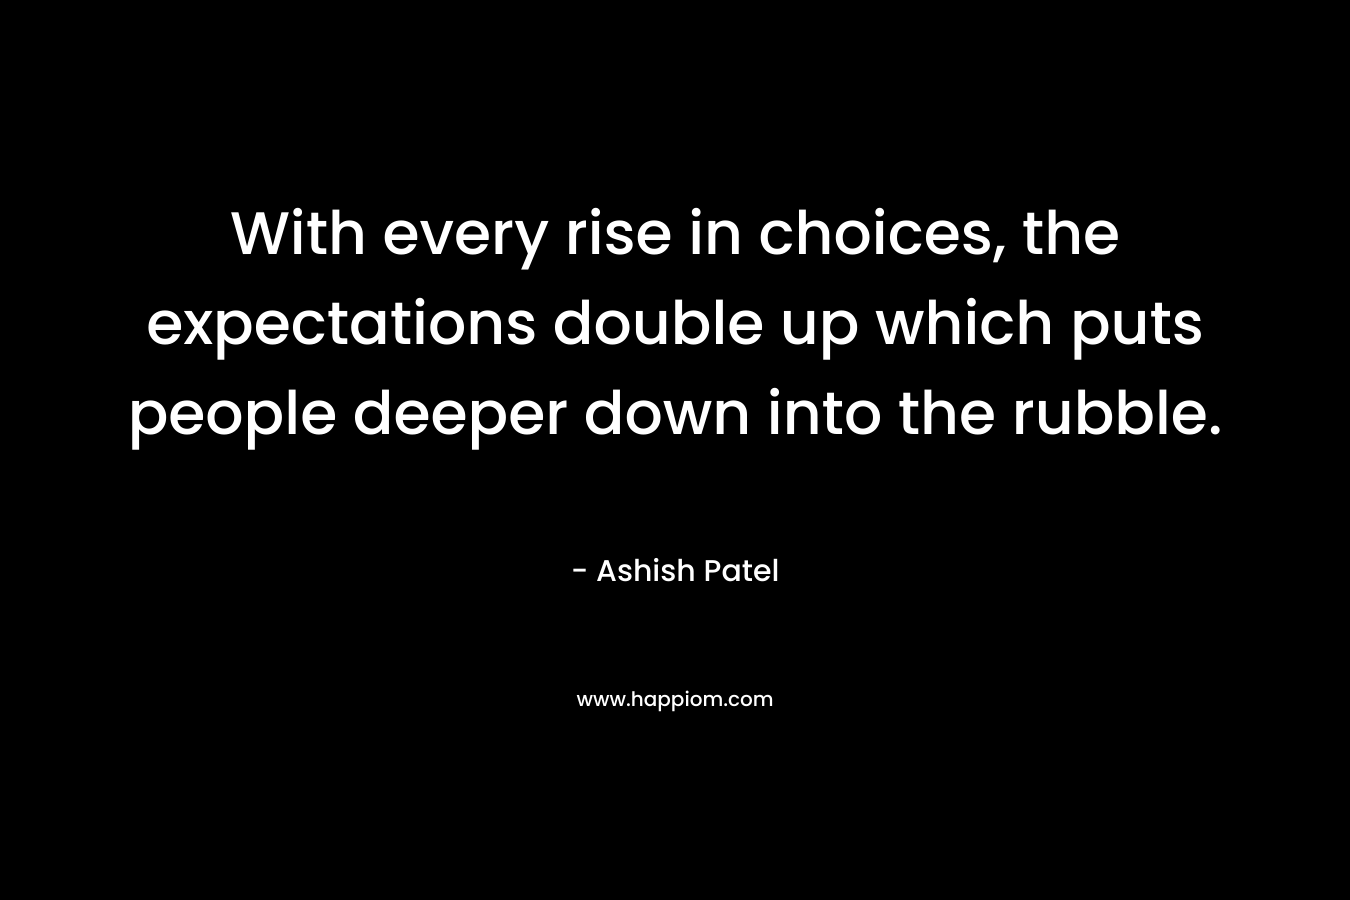 With every rise in choices, the expectations double up which puts people deeper down into the rubble. – Ashish Patel